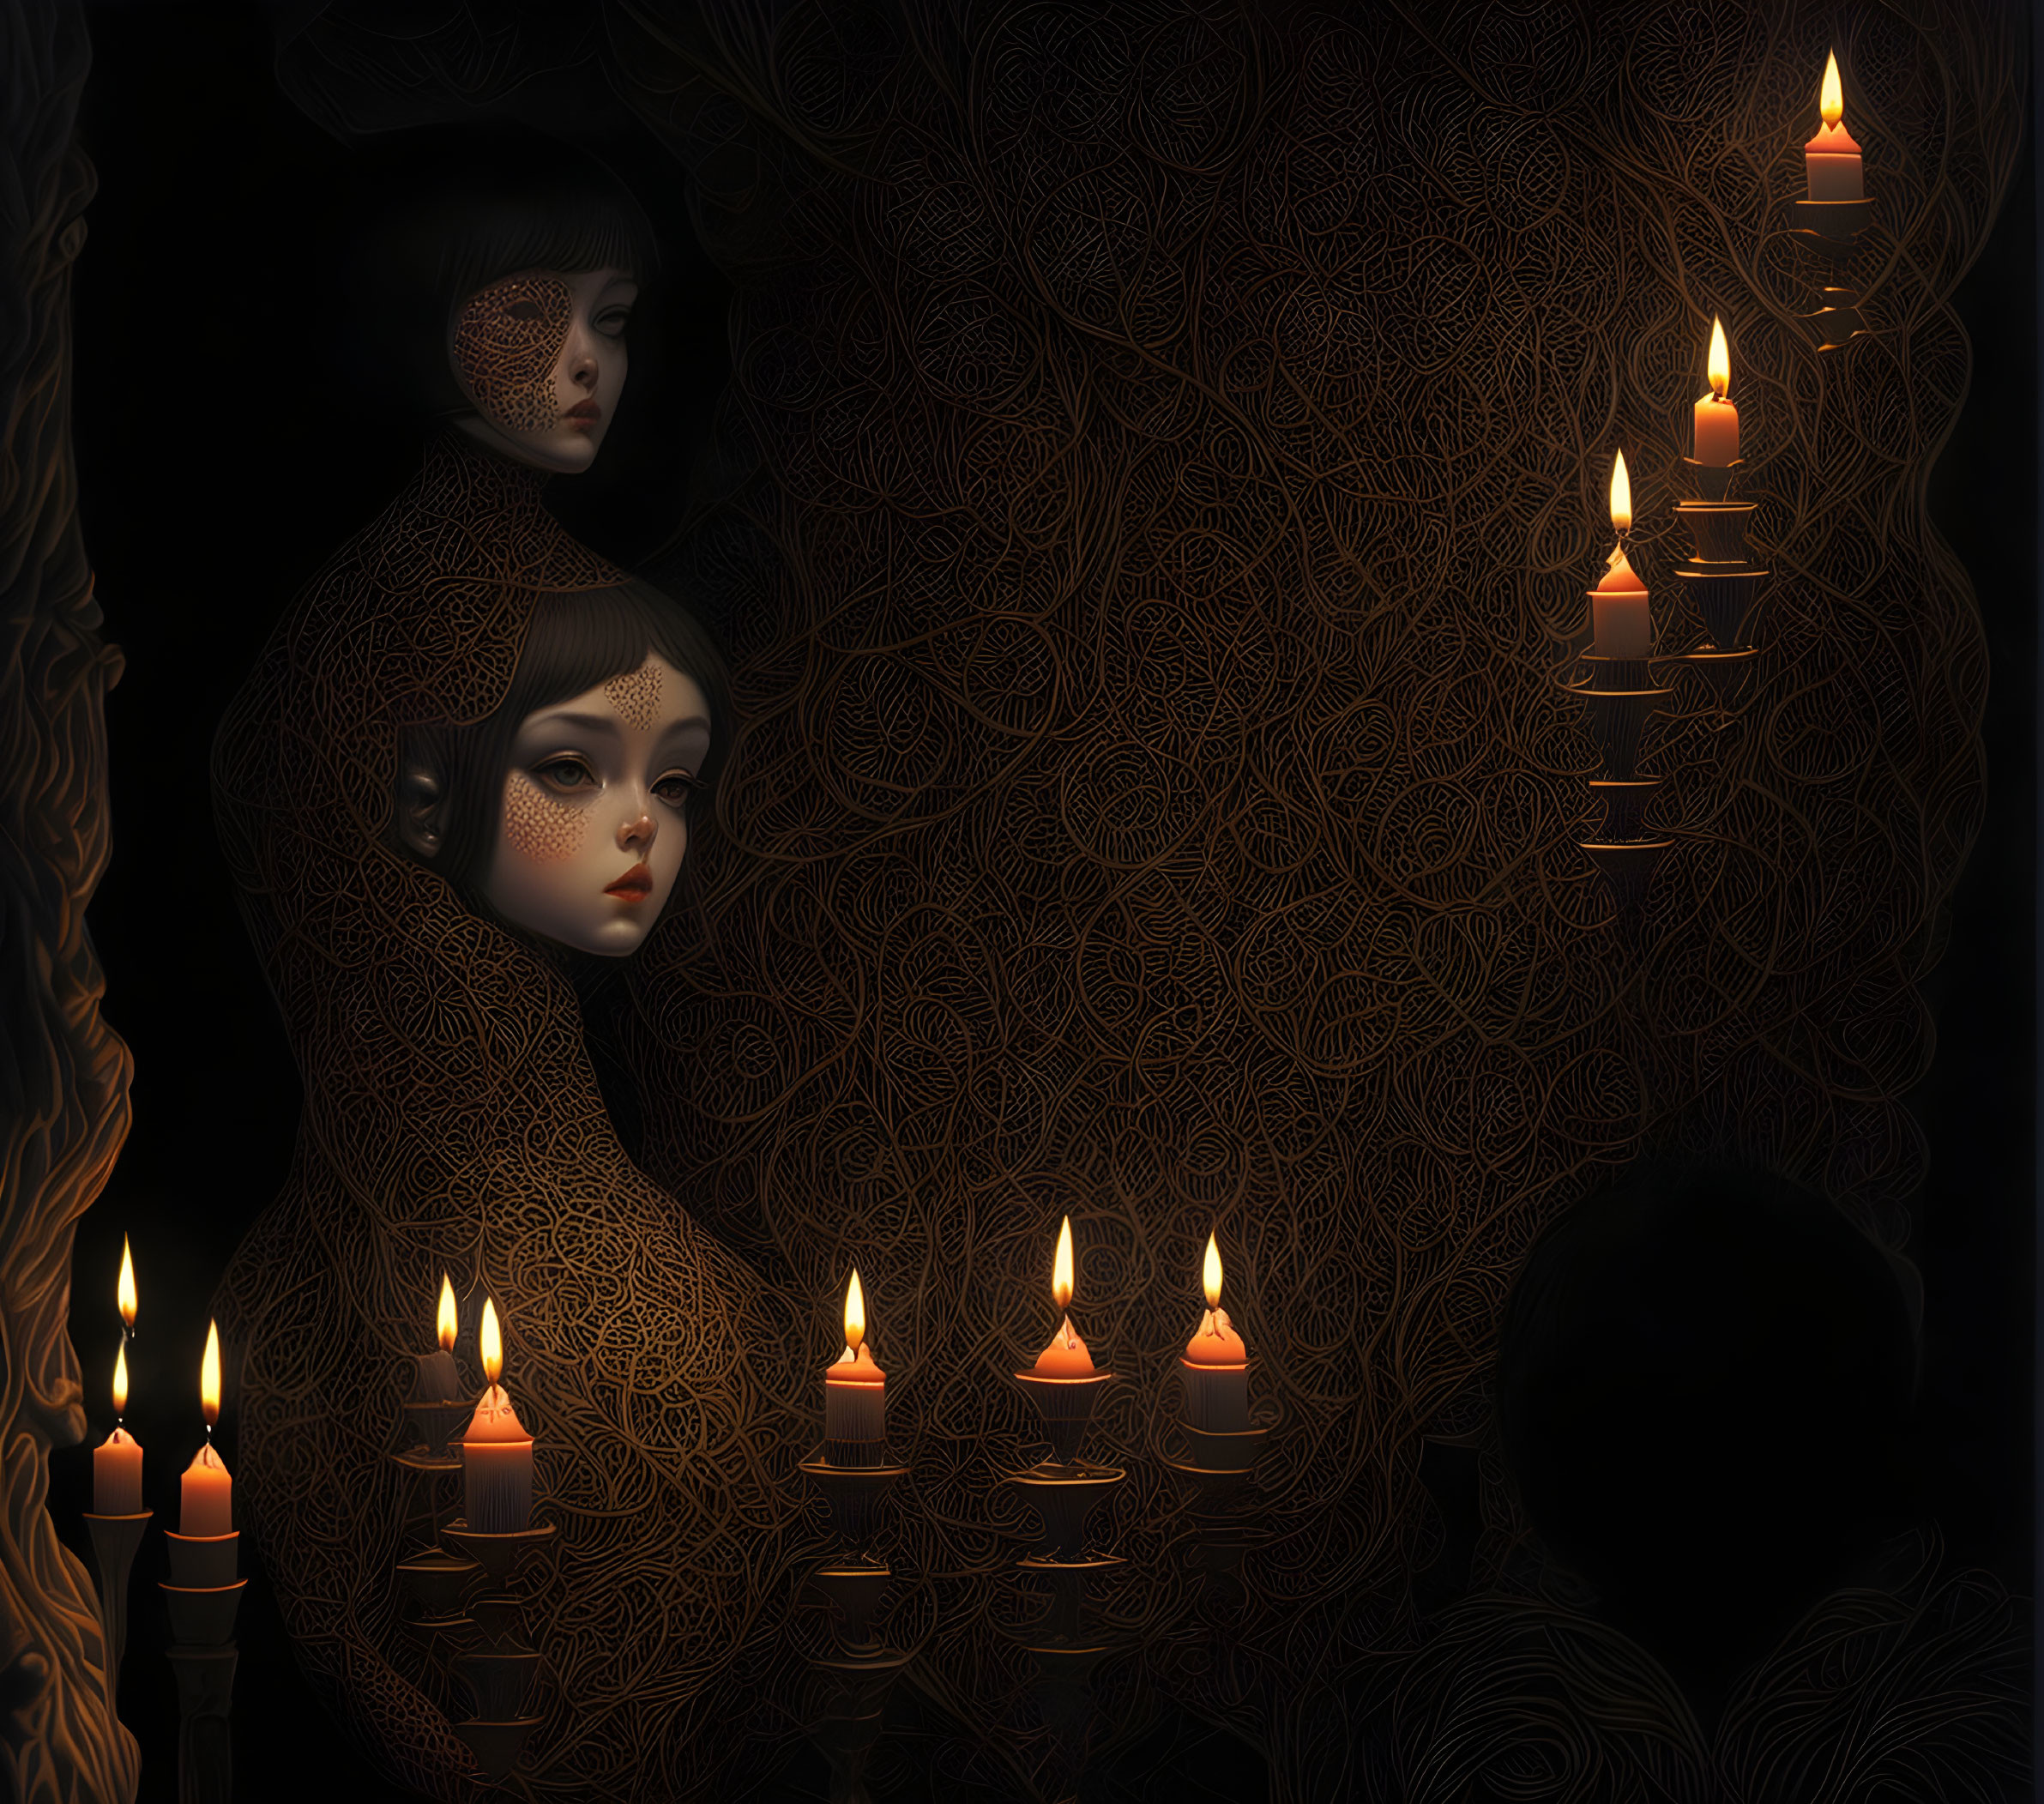 Shadowed Figures and Glowing Candles